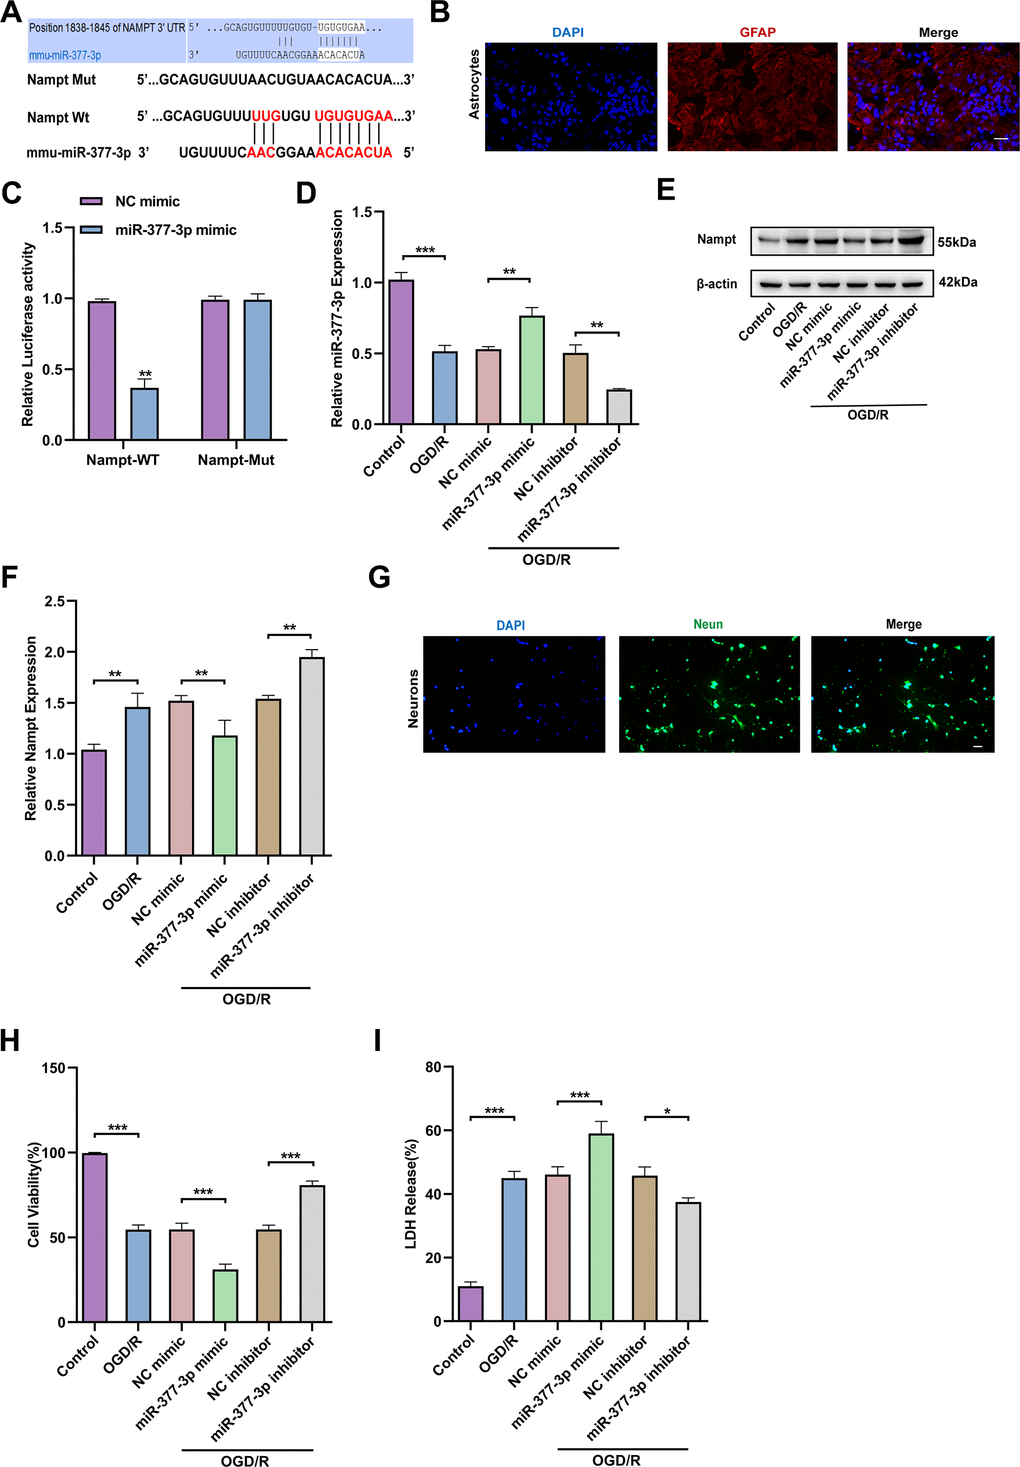 miR-377-3p inhibits the expression of Nampt in astrocytes after OGD/R, thus promoting neuronal injury. (A) Possible miRNA binding site on Nampt mRNA (predicted candidate miR-377-3p target gene by bioinformatics databases). (B) GFAP immunofluorescence validation of astrocytes (immunofluorescence images of primary astrocytes. Scale bar: 20 μm). (C) Relative luciferase activity of Nampt wild-type and 3ʹ-UTR mutant structures transfected with miR-377-3p mimics and NC mimic. (D) RT-qPCR detection of miR-377-3p levels in primary astrocytes after OGD/R following miR-377-3p mimic or miR-377-3p inhibitor treatment. (E) Western blot analysis of Nampt protein expression in primary astrocytes after OGD/R following miR-377-3p mimic or miR-377-3p inhibitor treatment. (F) A bar presenting the quantification of Nampt in primary astrocytes. (G) NeuN immunofluorescence validation of neurons (immunofluorescence images of primary neurons. (Scale bar: 20 μm.). (H) The co-cultured neuron viability was determined by CCK-8 assay after miR-377-3p mimic or miR-377-3p inhibitor transfection in astrocytes and OGD/R treatment. (I) LDH assay to detect the effect on co-cultured neurons after miR-377-3p mimic or miR-377-3p inhibitor treatment in primary astrocytes and OGD/R treatment. The relative expression levels were quantified by normalizing to β-actin. Data are represented as mean ± SD, (n = 3; *P P P 